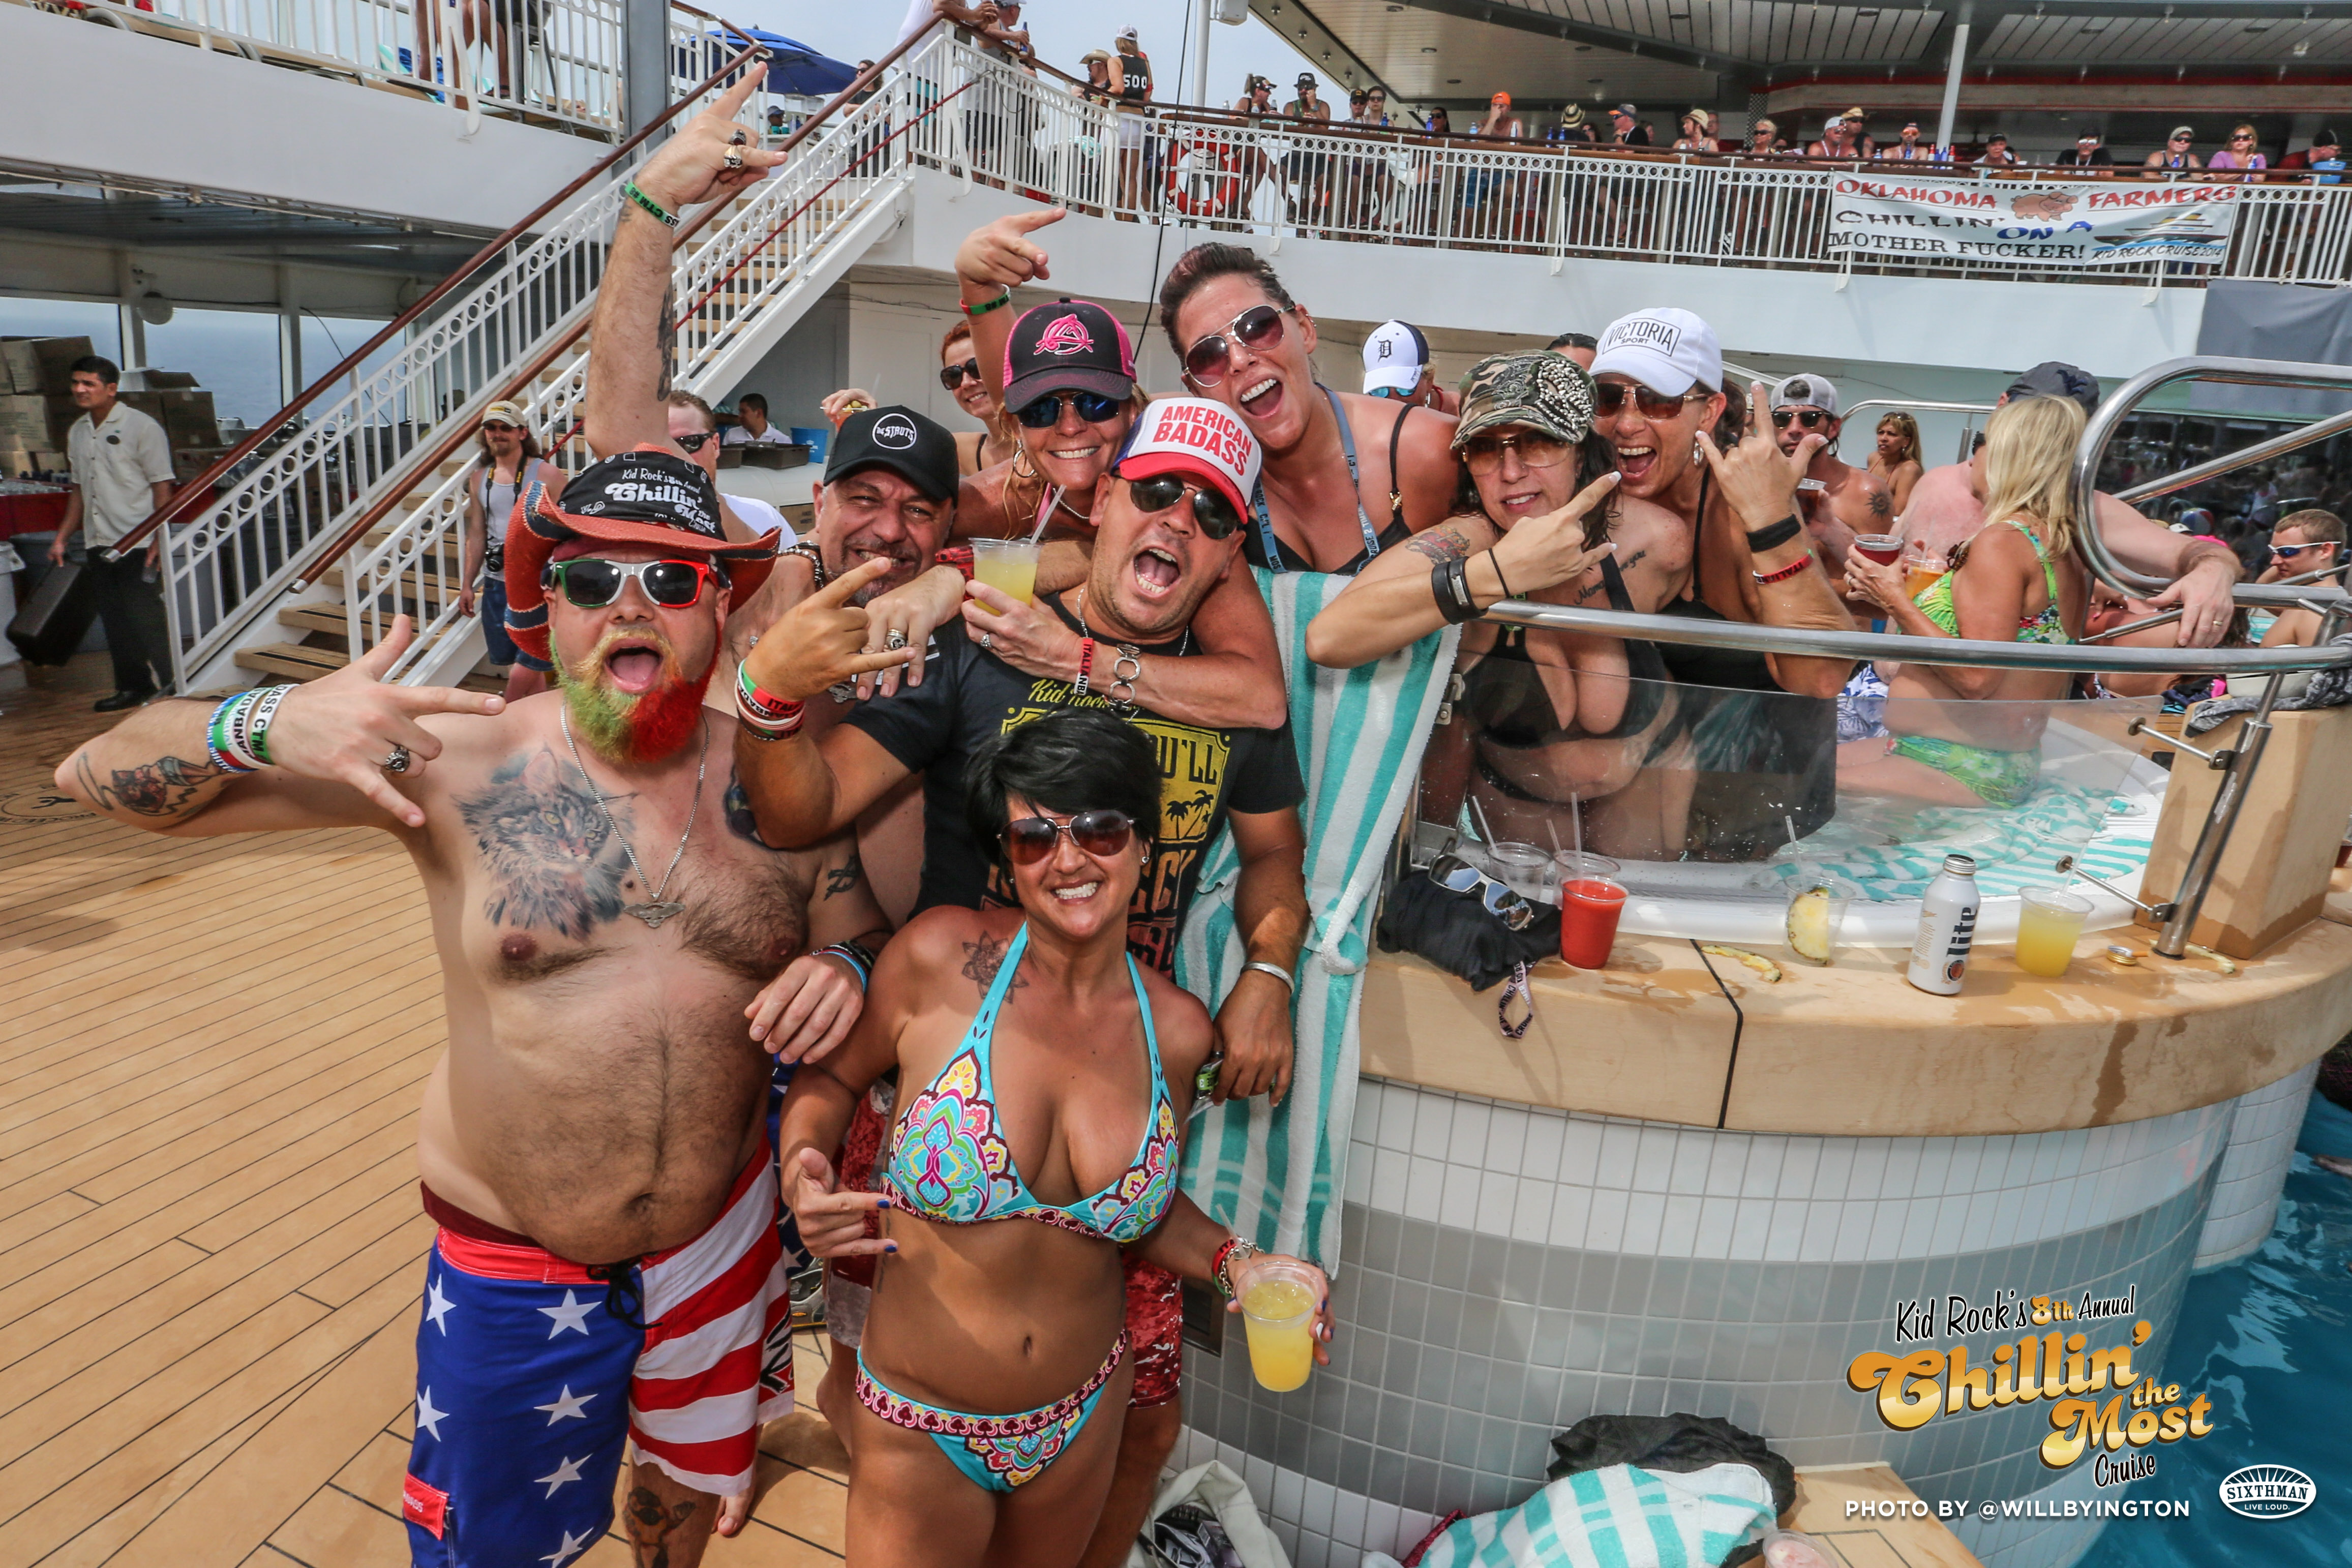 My Liberal Ass Spent 5 Nights on Kid Rocks Chillin the Most Cruise picture